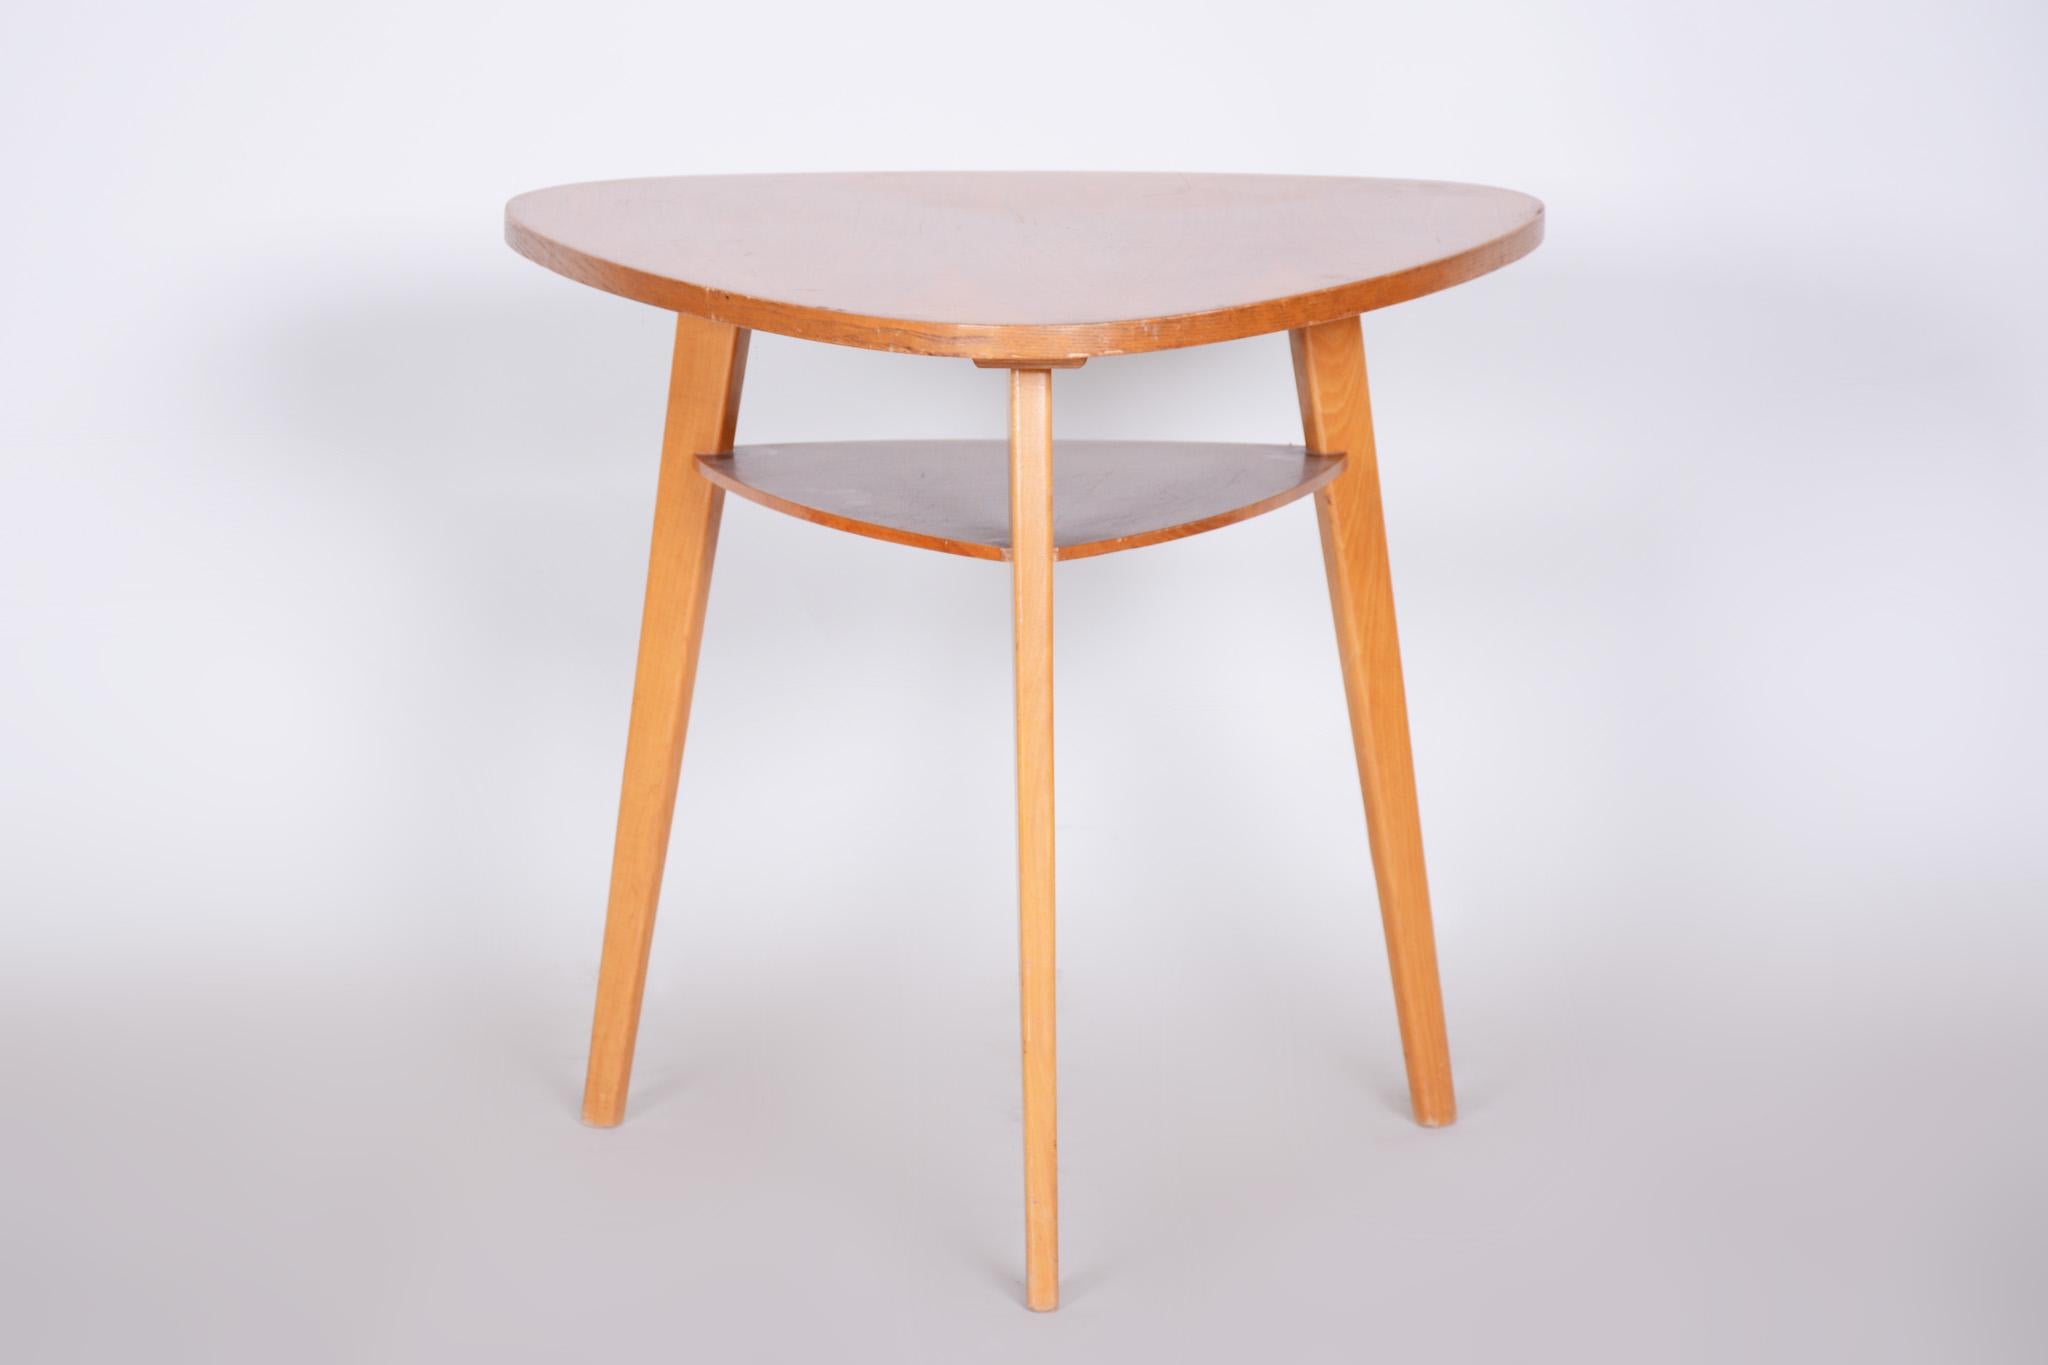 Small table.
Czech midcentury
Material: Oak and beech
Period: 1950-1959.
Condition: Original, not restored.